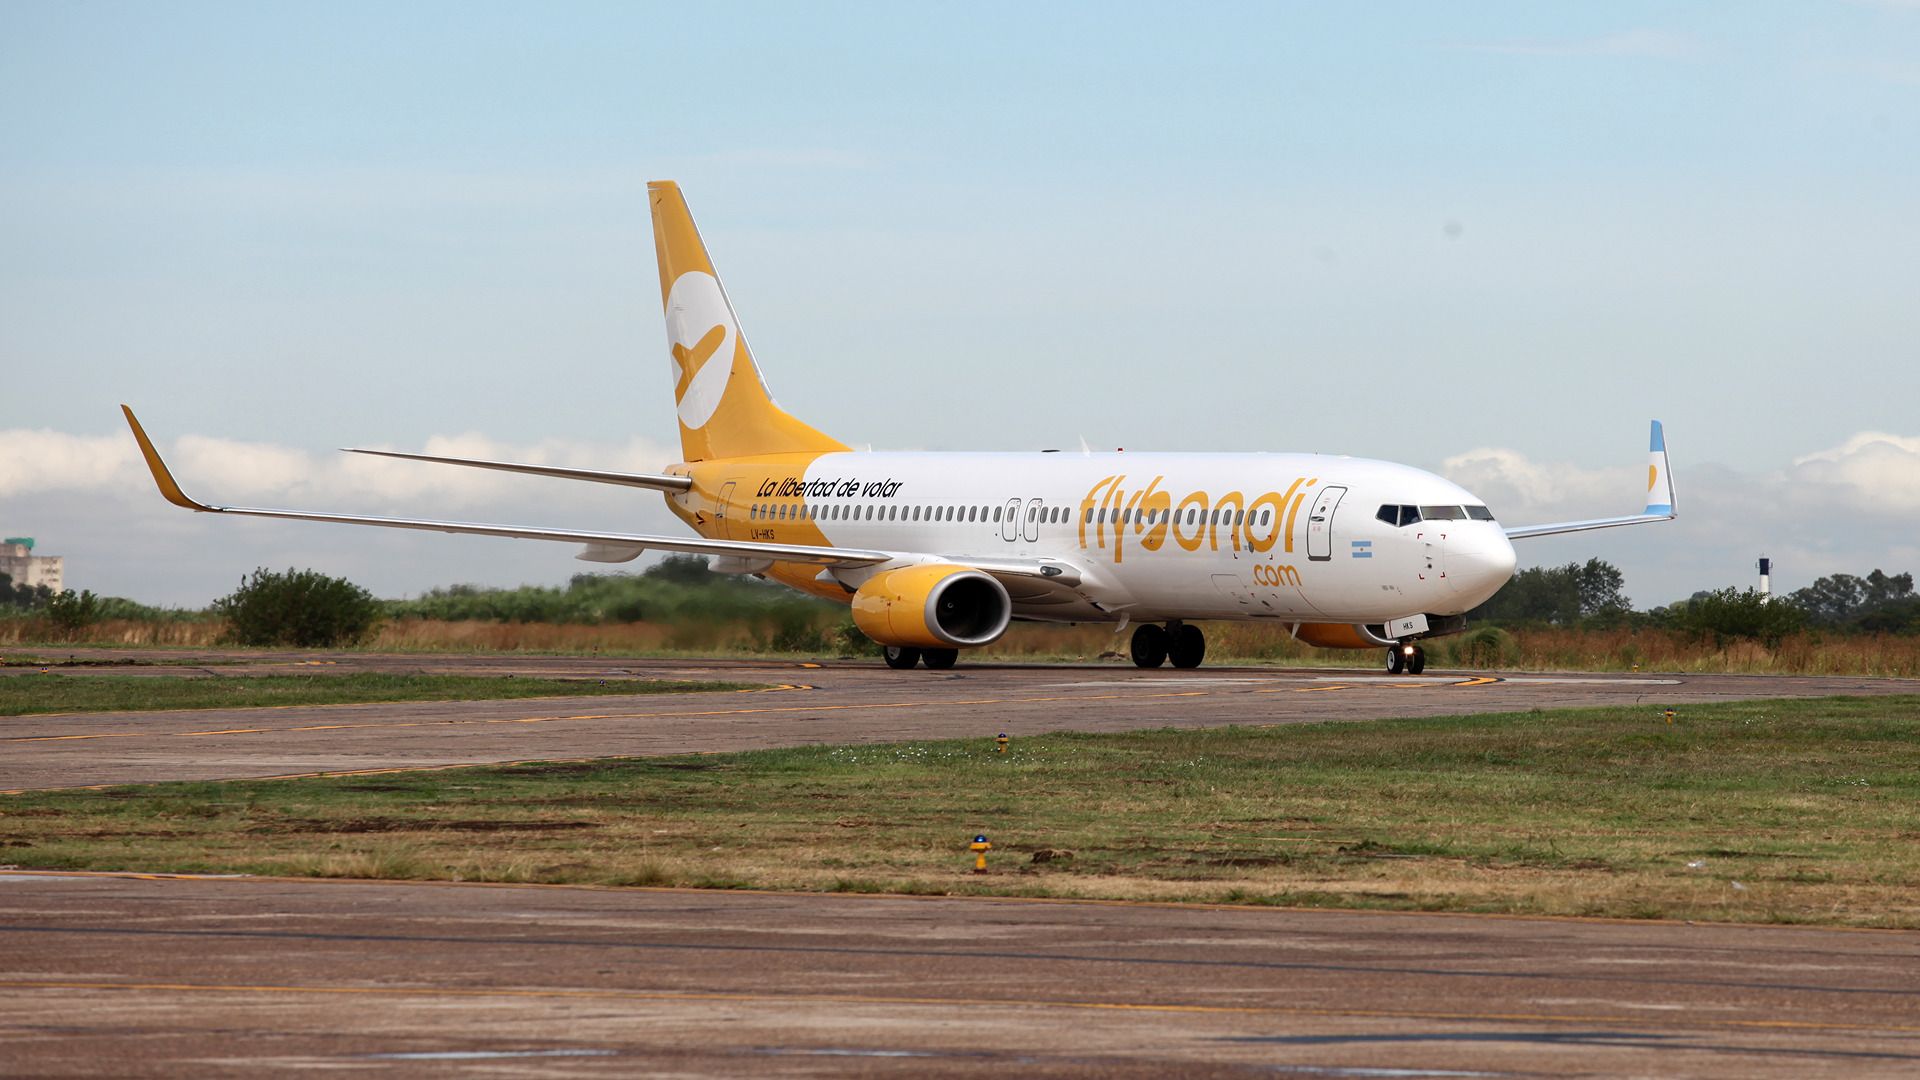 1920 x 1080 A Flybondi Boeing 737-800 on the ground